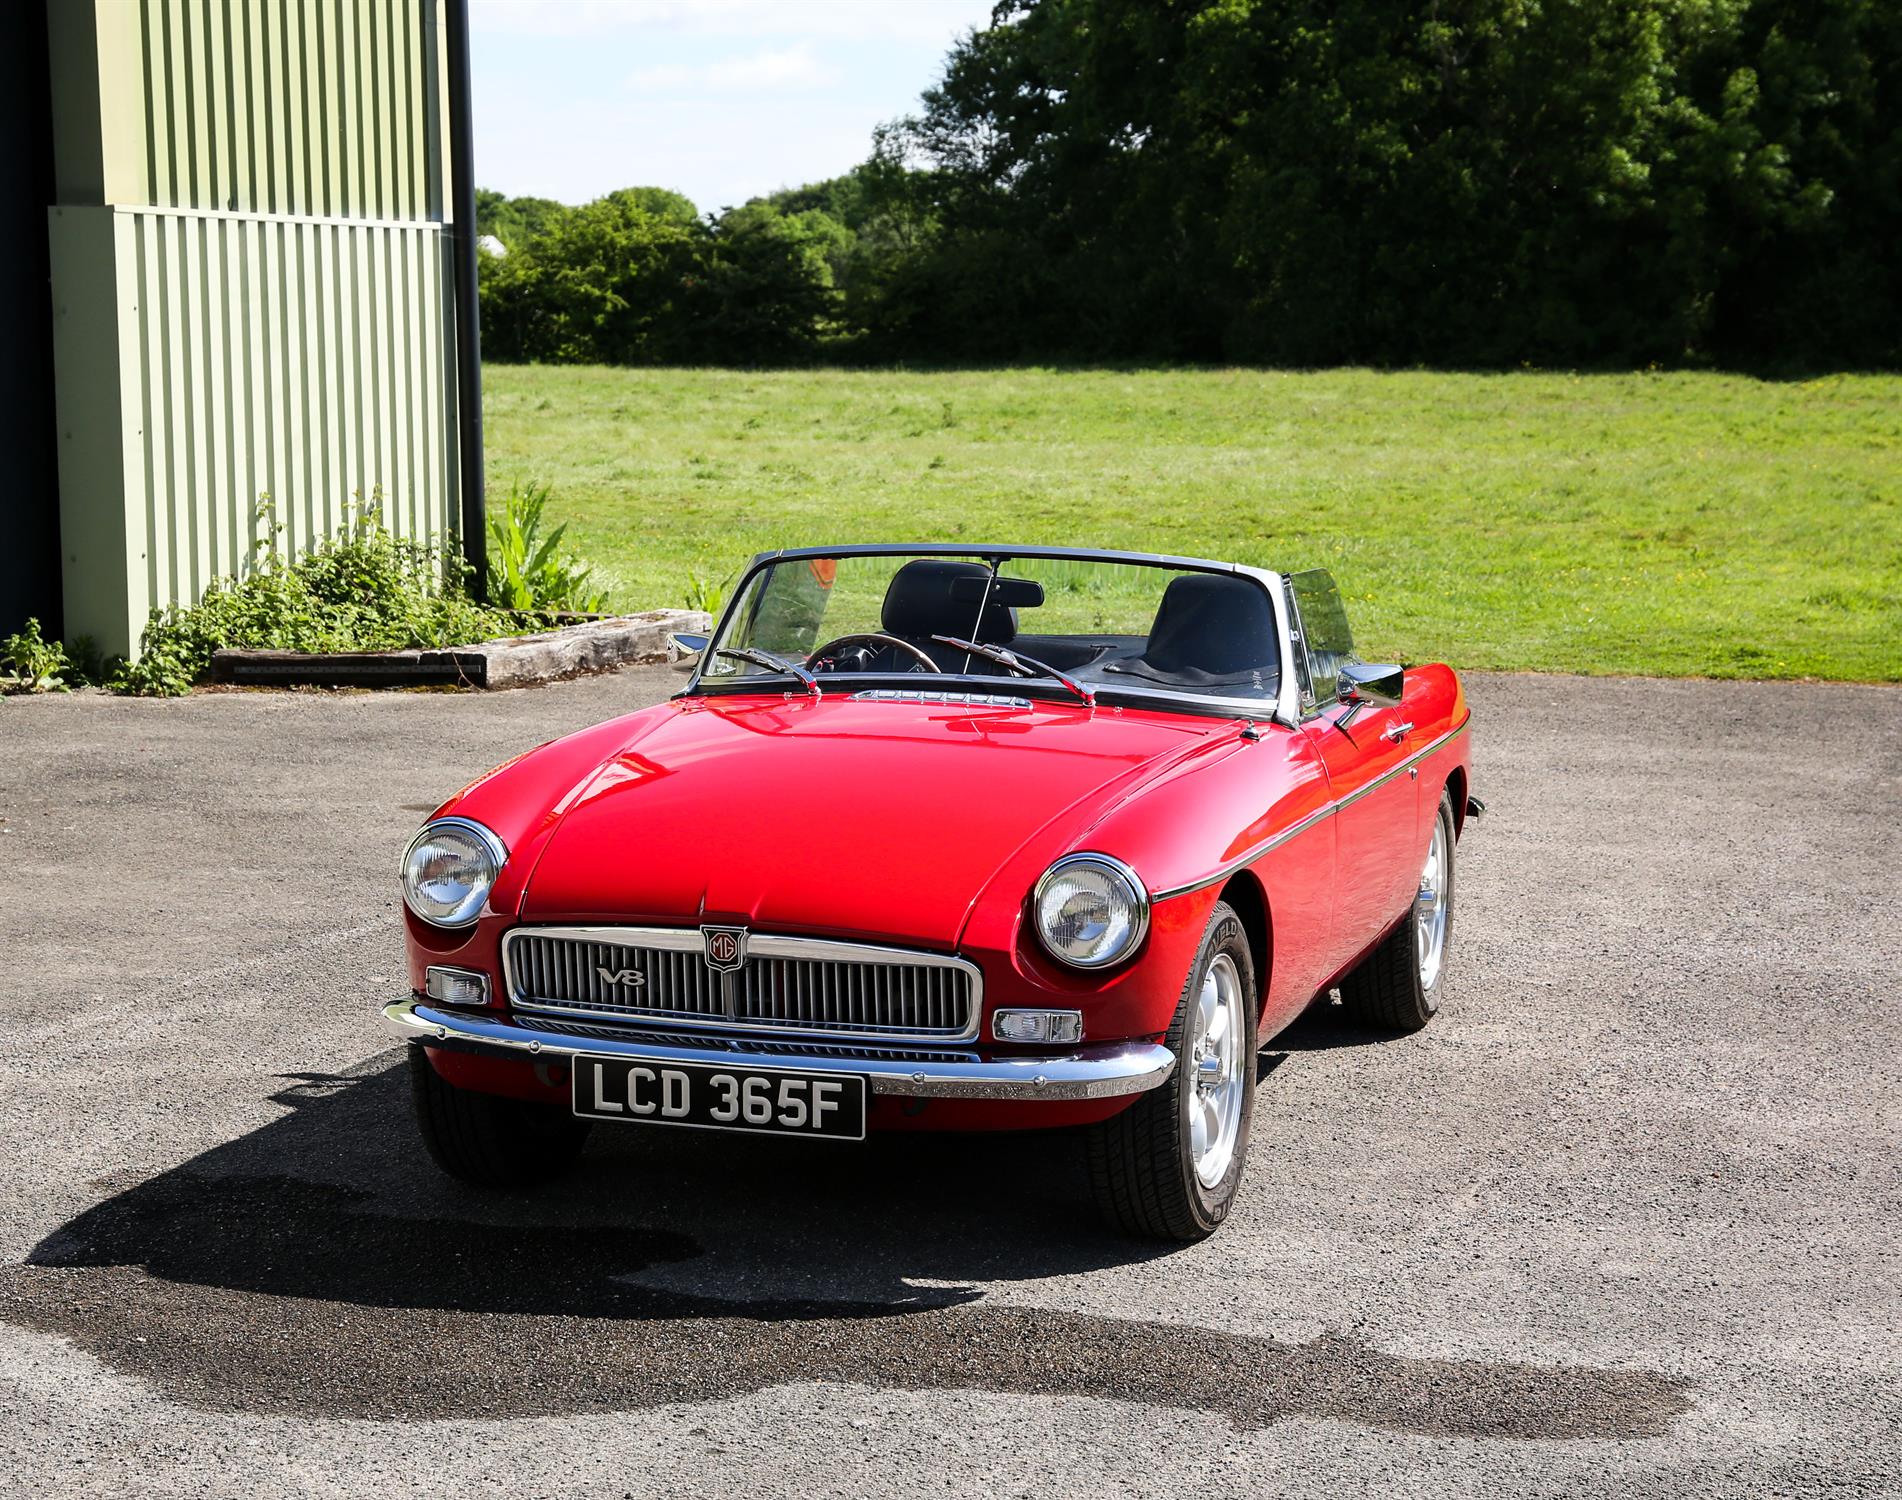 1968 MGB. Registration number LCD 365F - Fully rebuilt in 1997, with major refurbishment in 2019 - Image 6 of 6